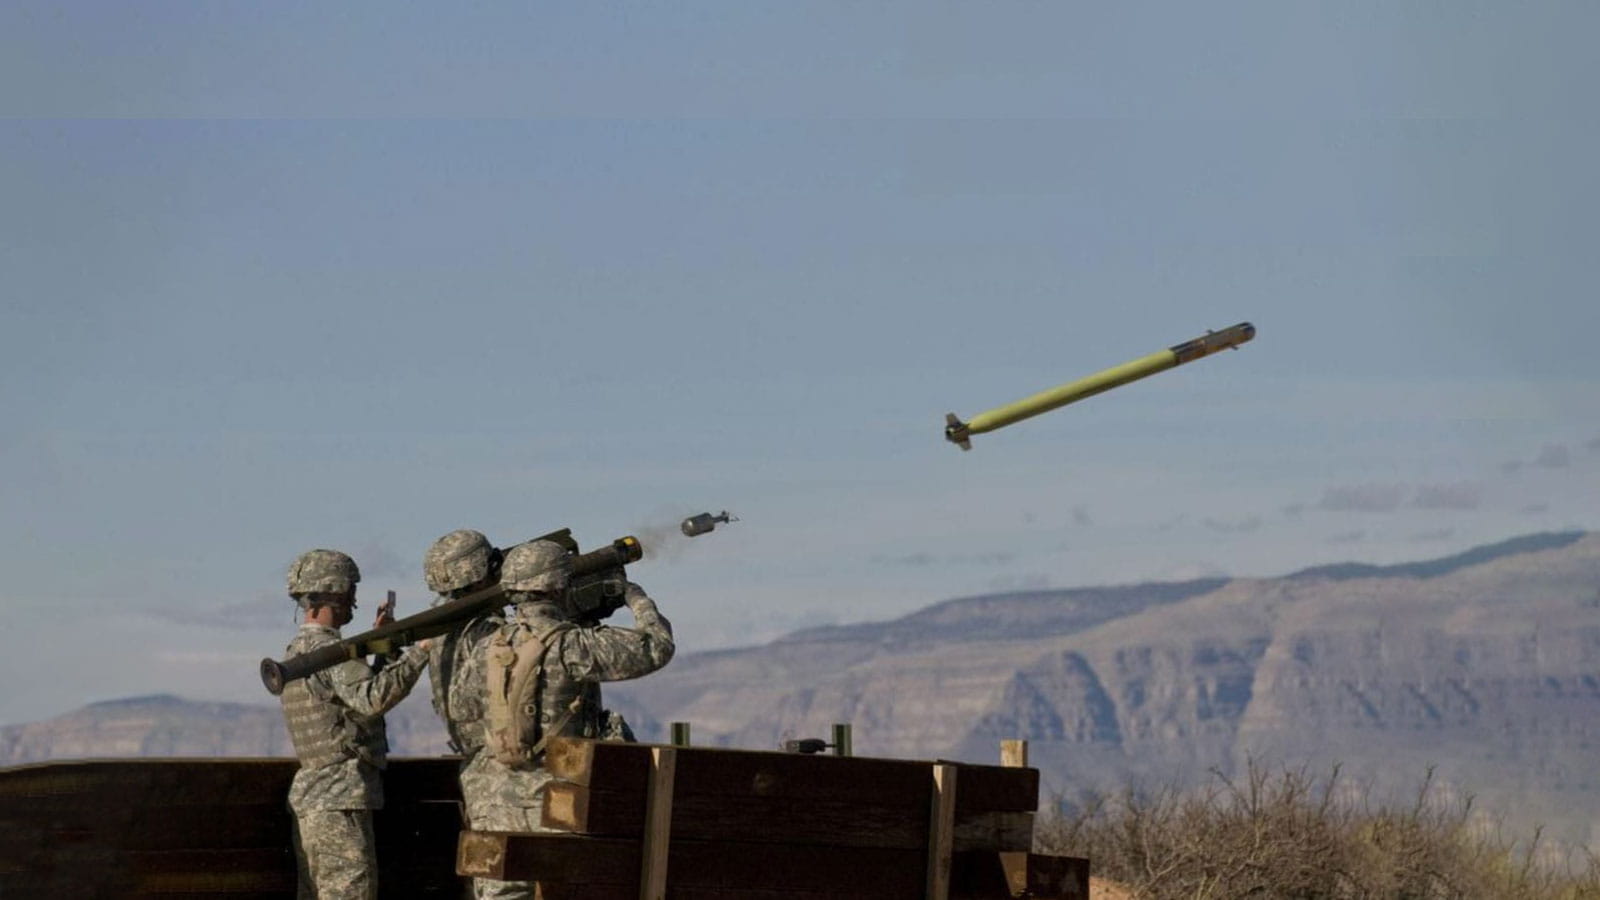 The combat-proven Stinger missile is a lightweight, self-contained air defense system that can be rapidly deployed by ground troops. (photo: U.S. Army)